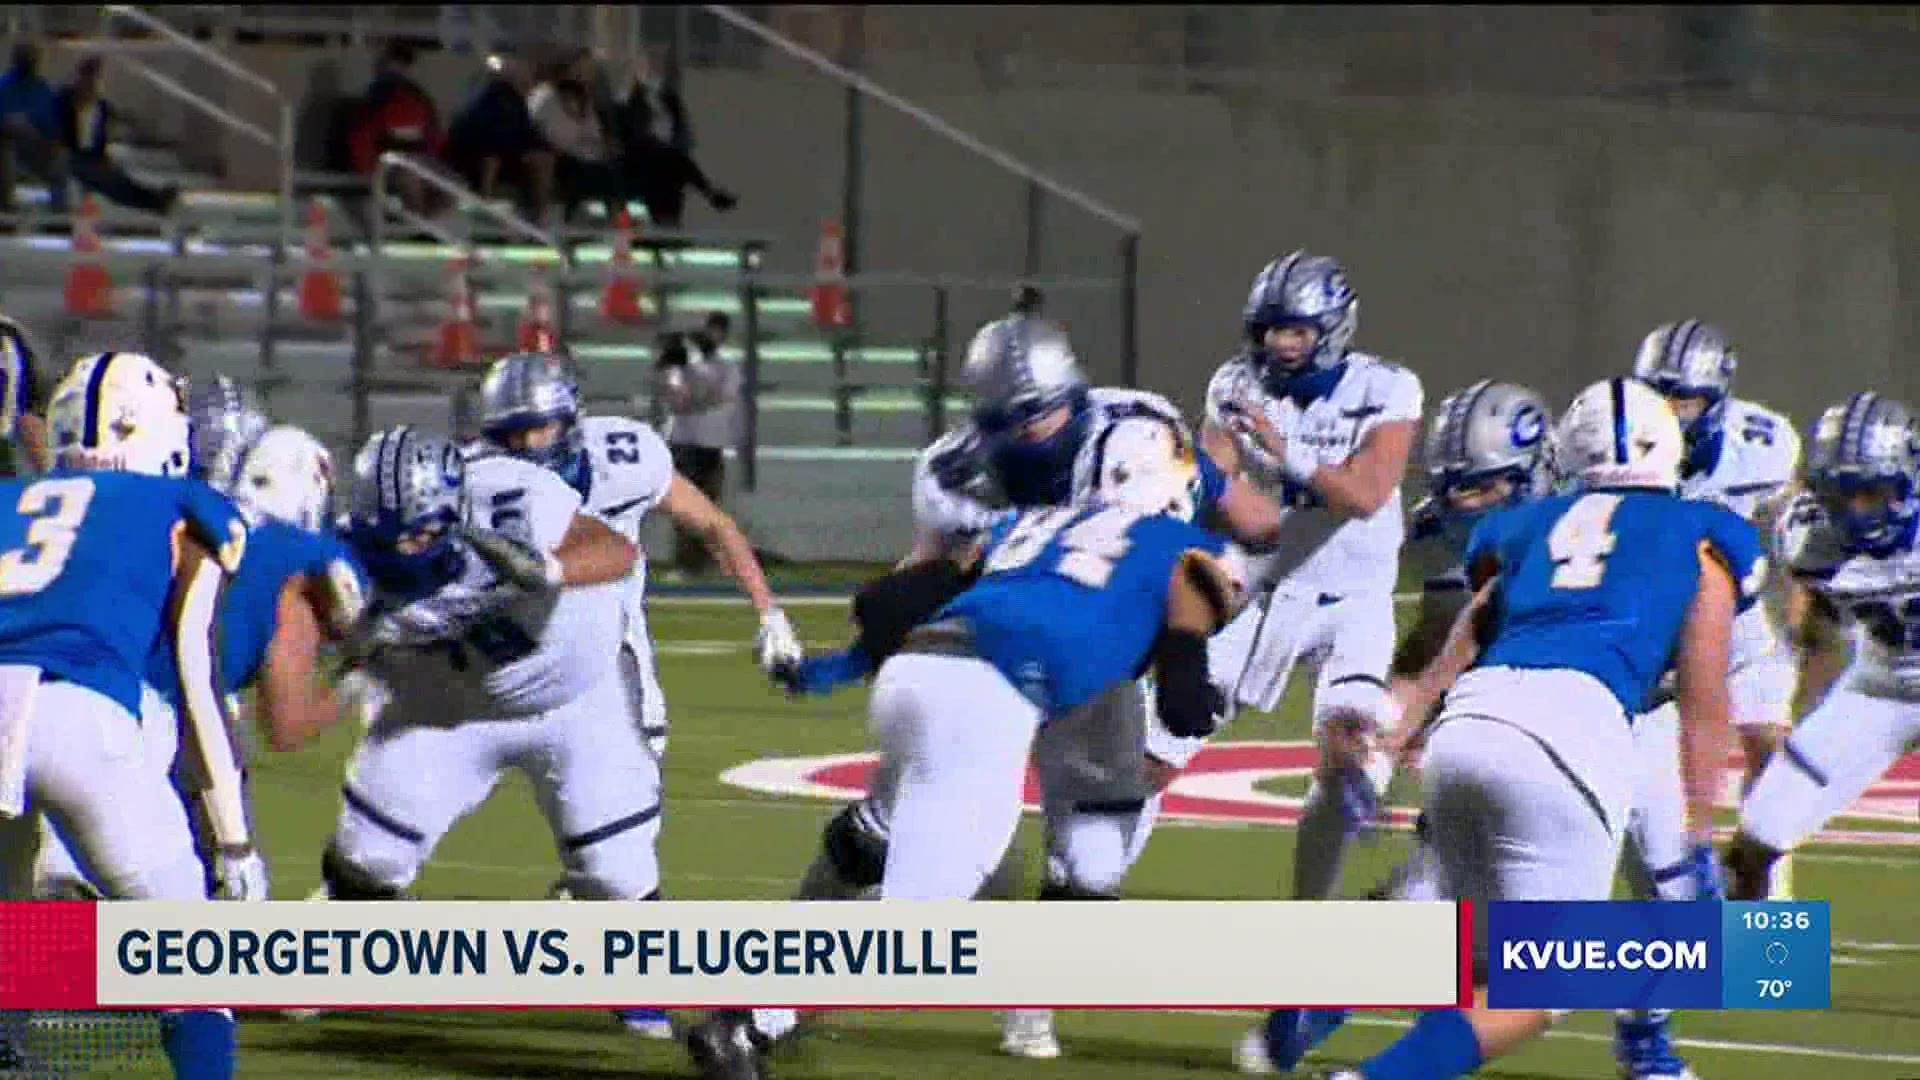 The Georgetown Eagles and Pflugerville Panthers matchup is KVUE's Game of the Week!